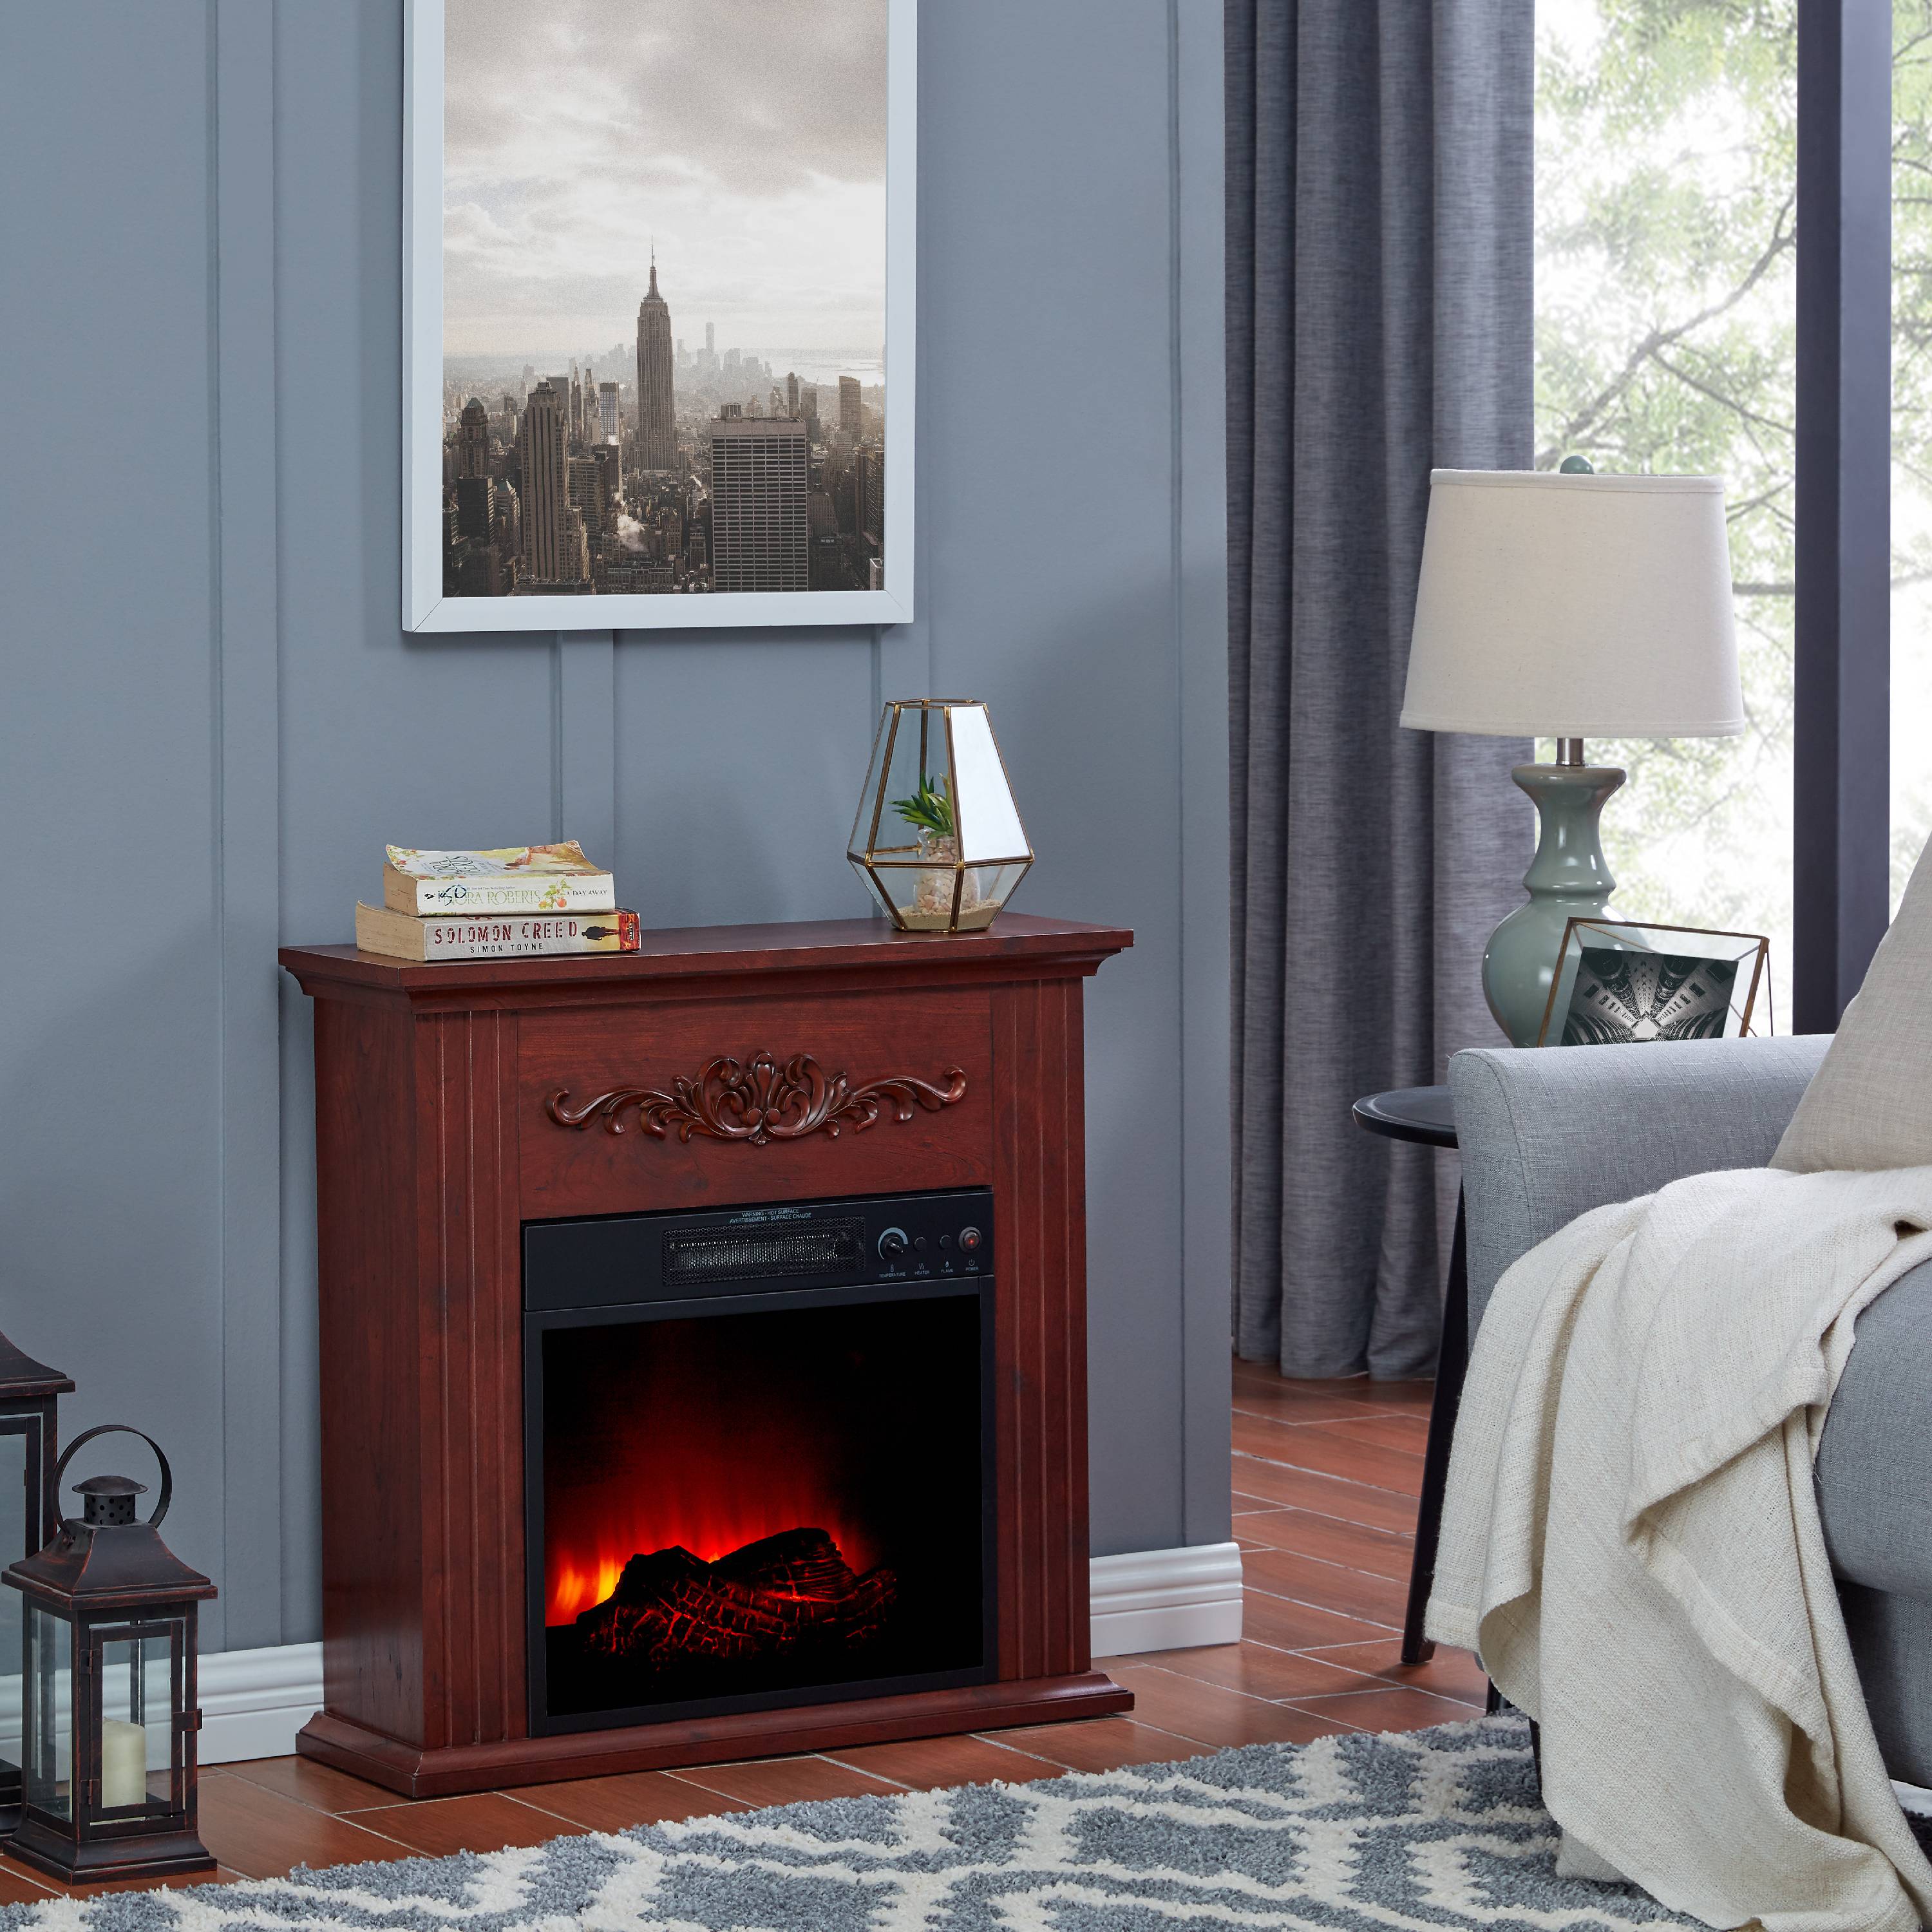 Bold Flame 28 inch Electric Fireplace Heater, Chestnut - image 1 of 5